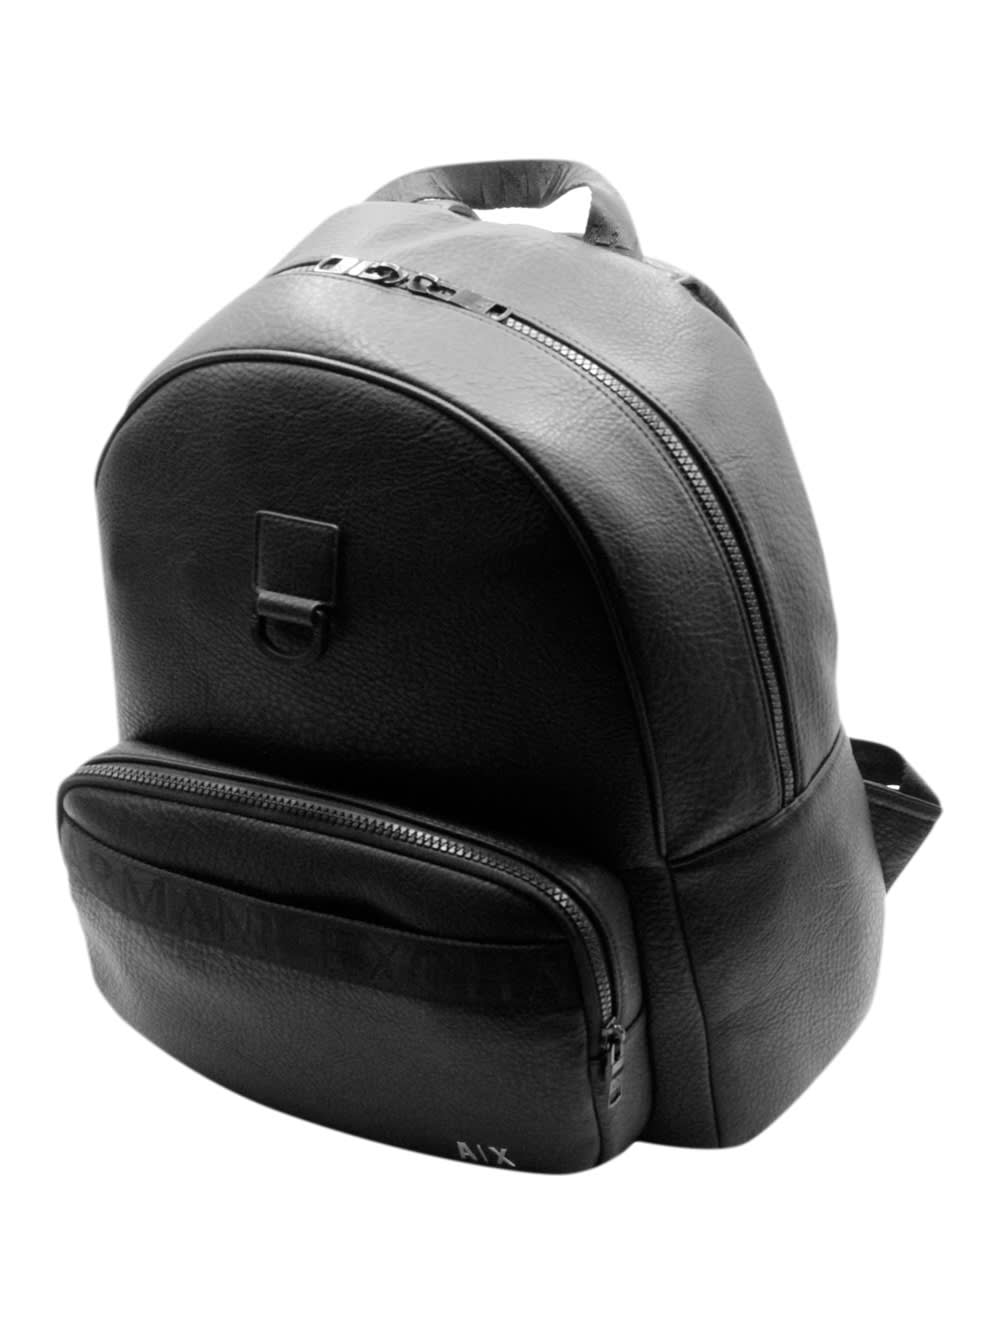 Backpack In Very Soft Soft Grain Eco-leather With Logo Written On The Front. Adjustable Shoulder Straps. Measures 38x32x12 Cm